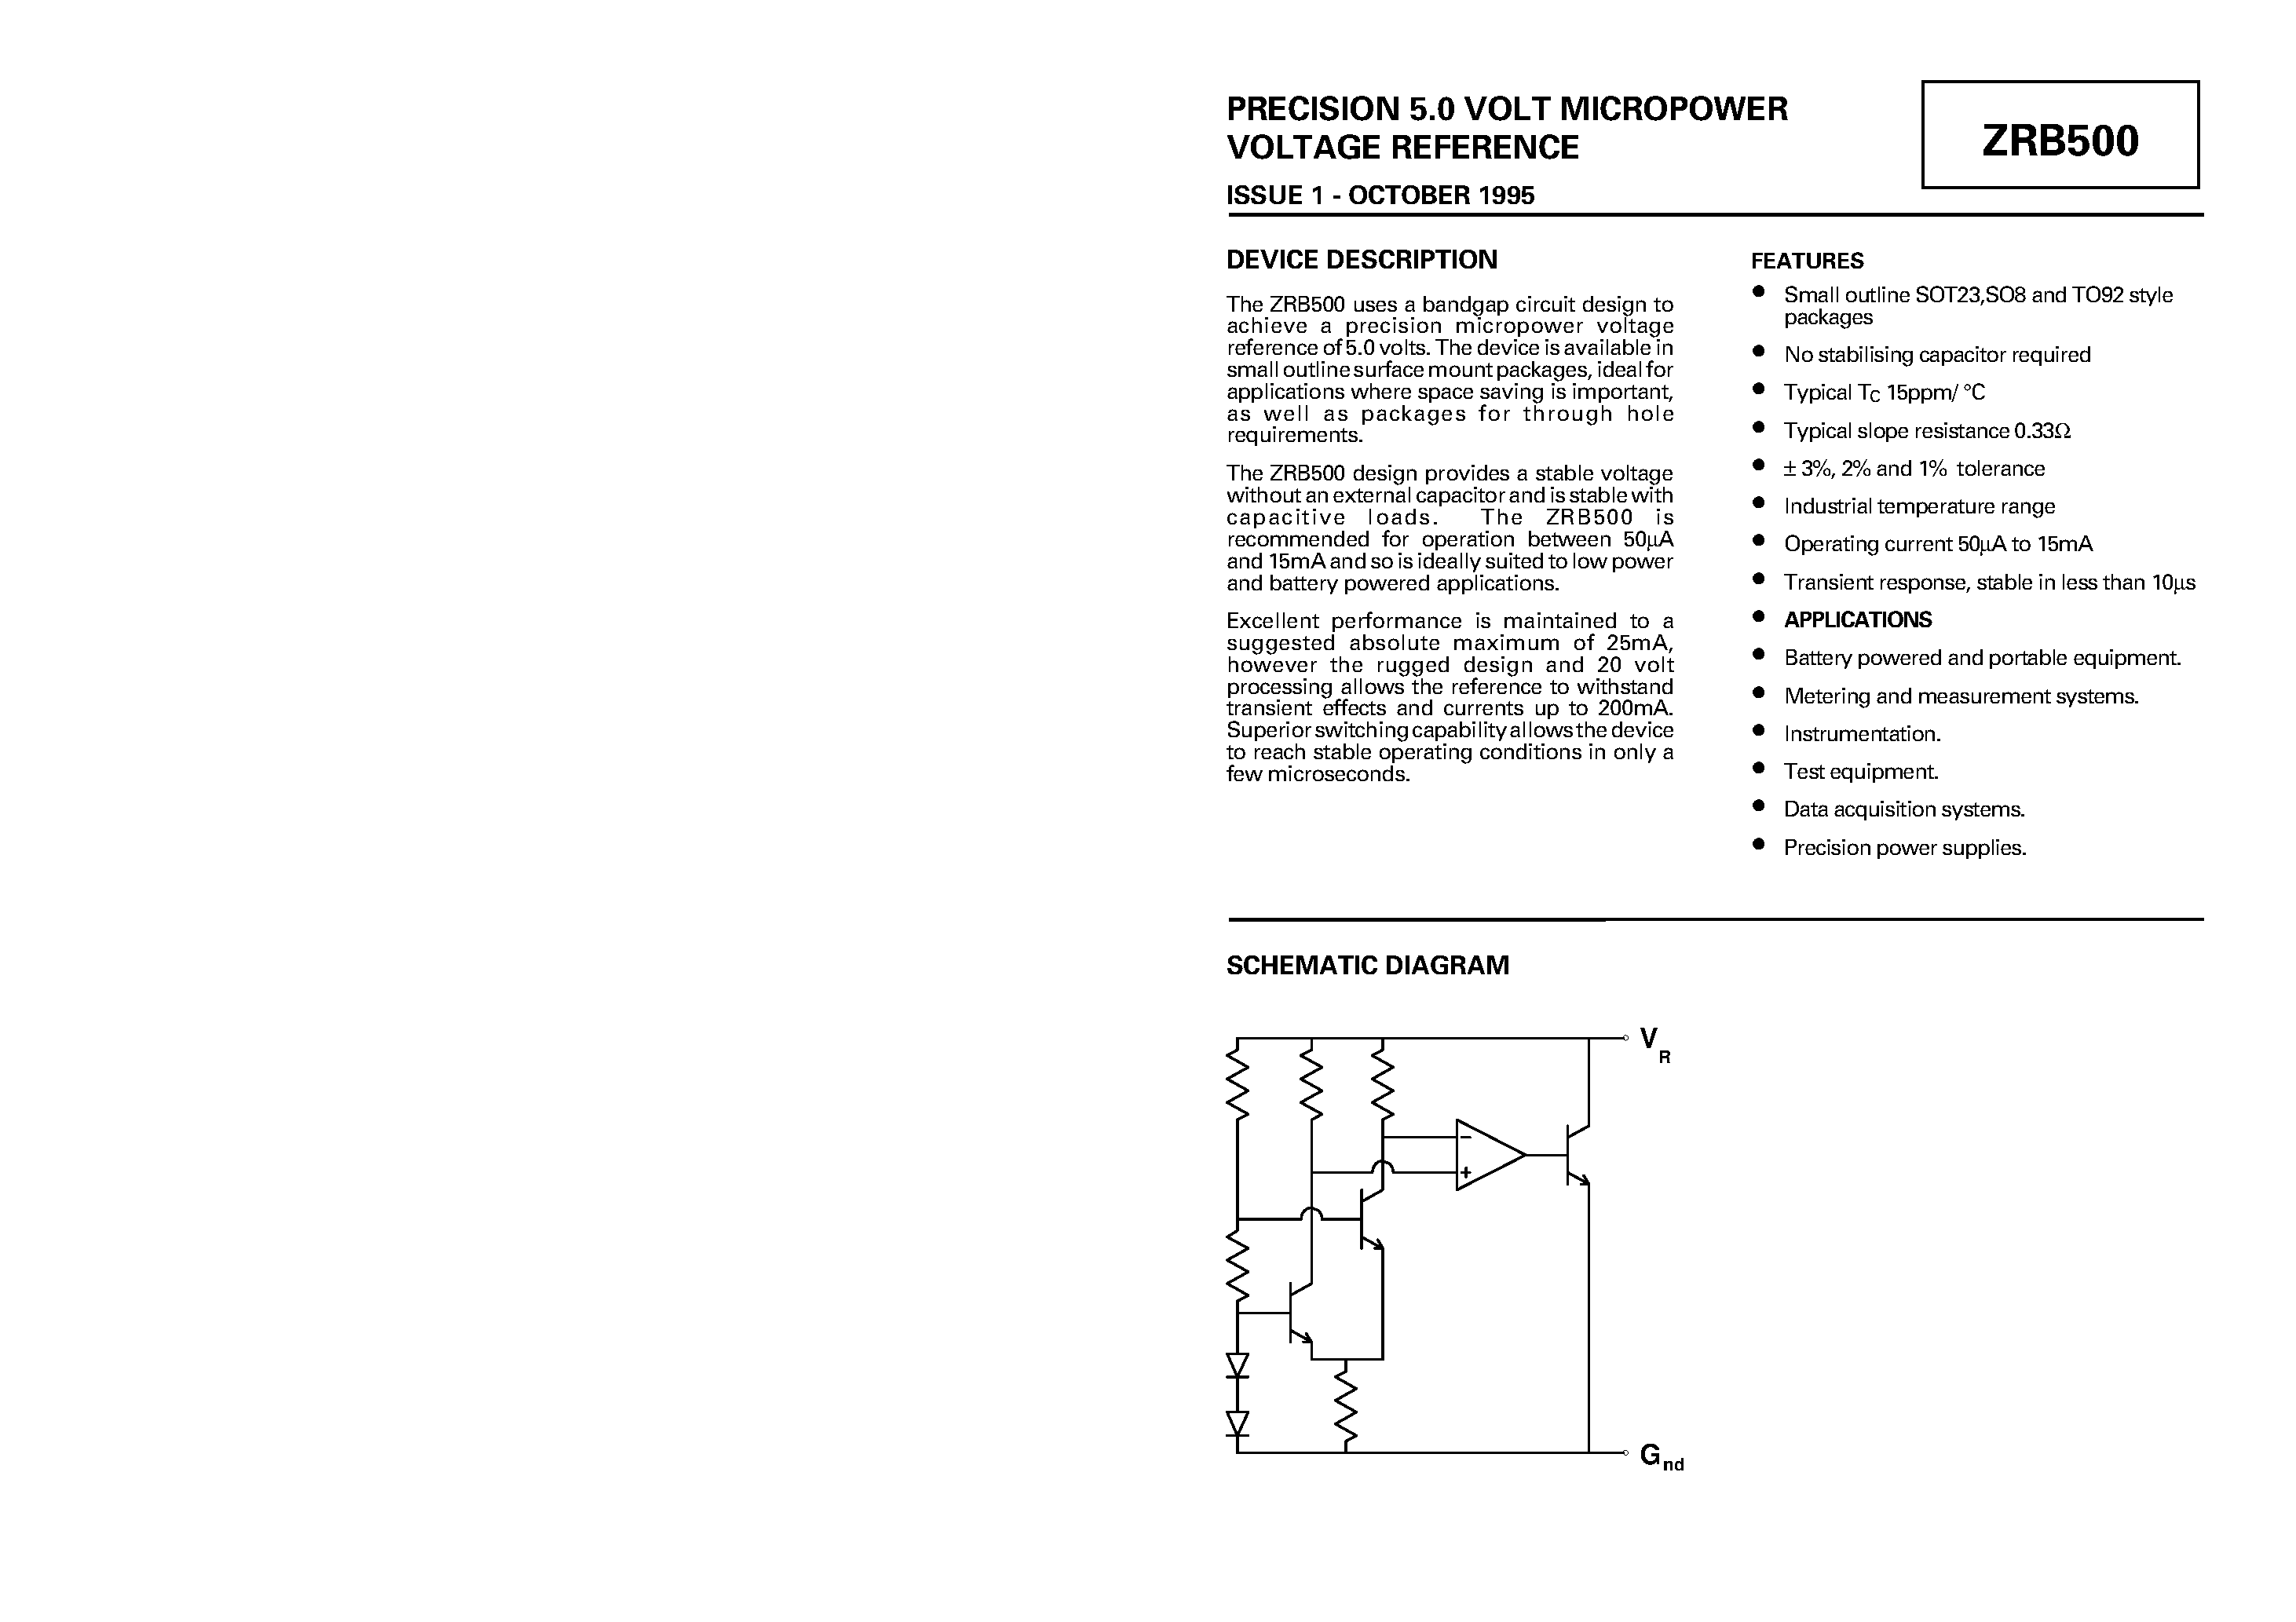 Datasheet ZRB500Y03 - PRECISION 5.0 VOLT MICROPOWER VOLTAGE REFERENCE page 1